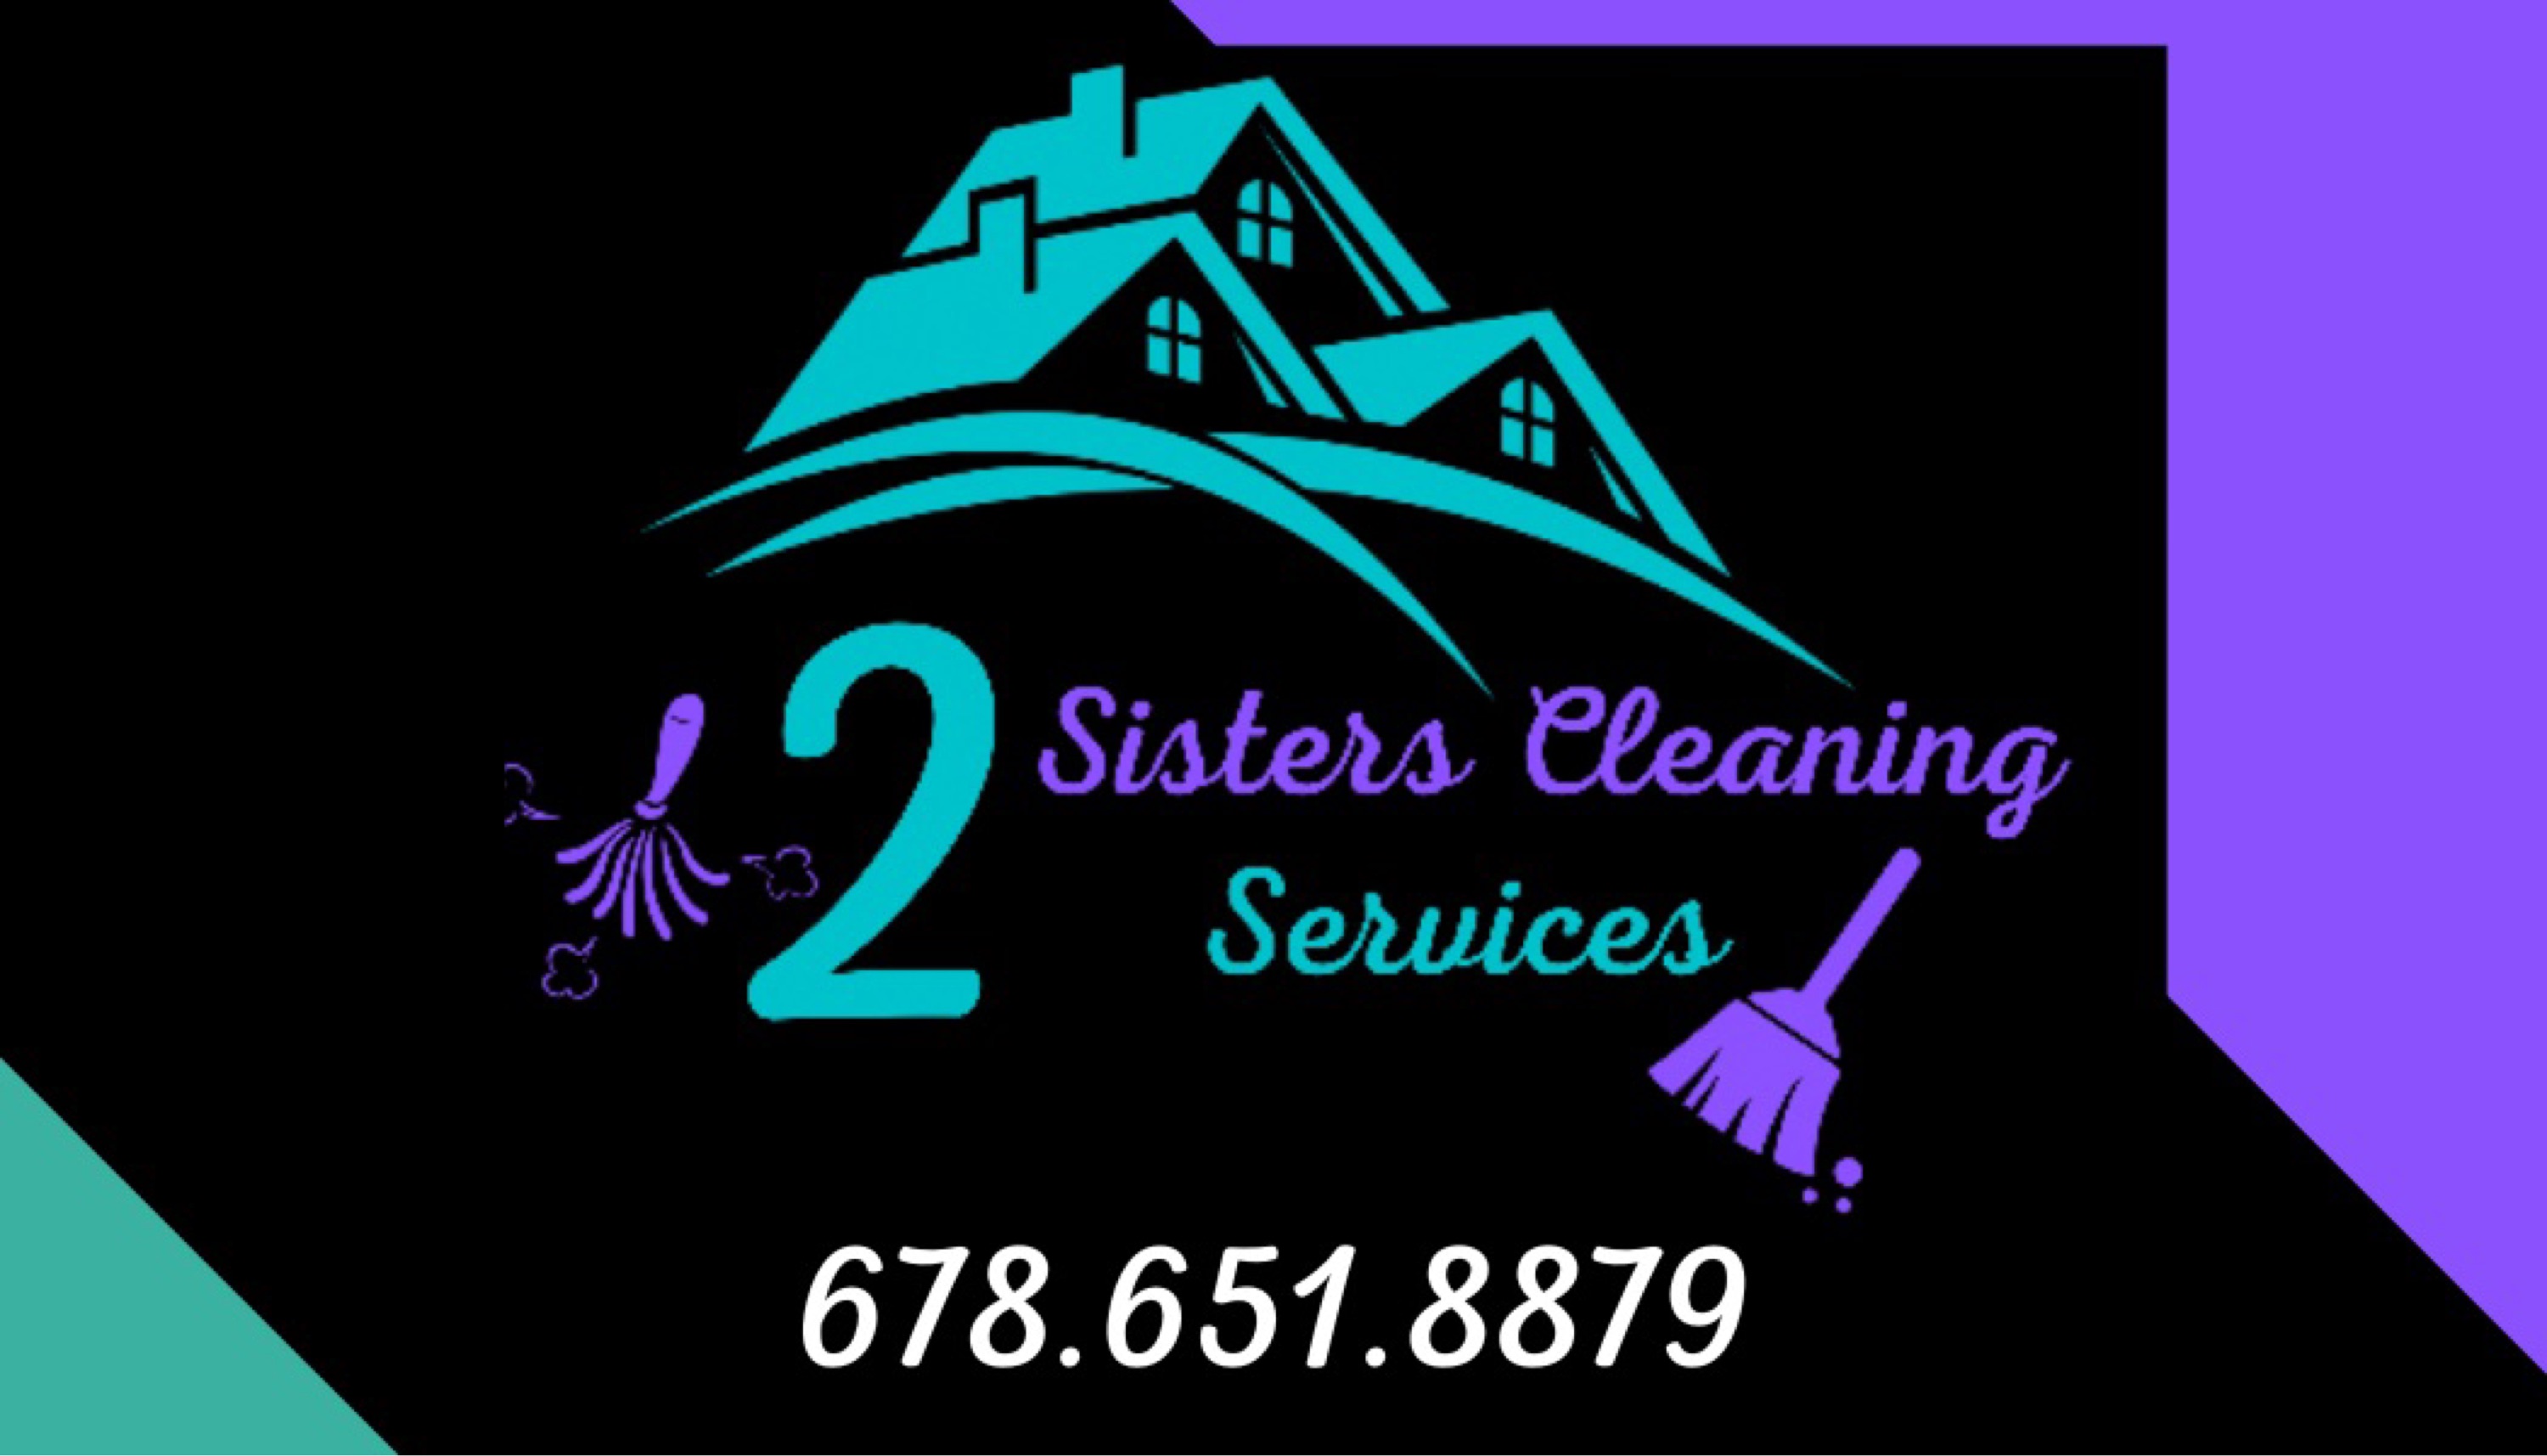 2 Sisters Cleaning Services, LLC Logo